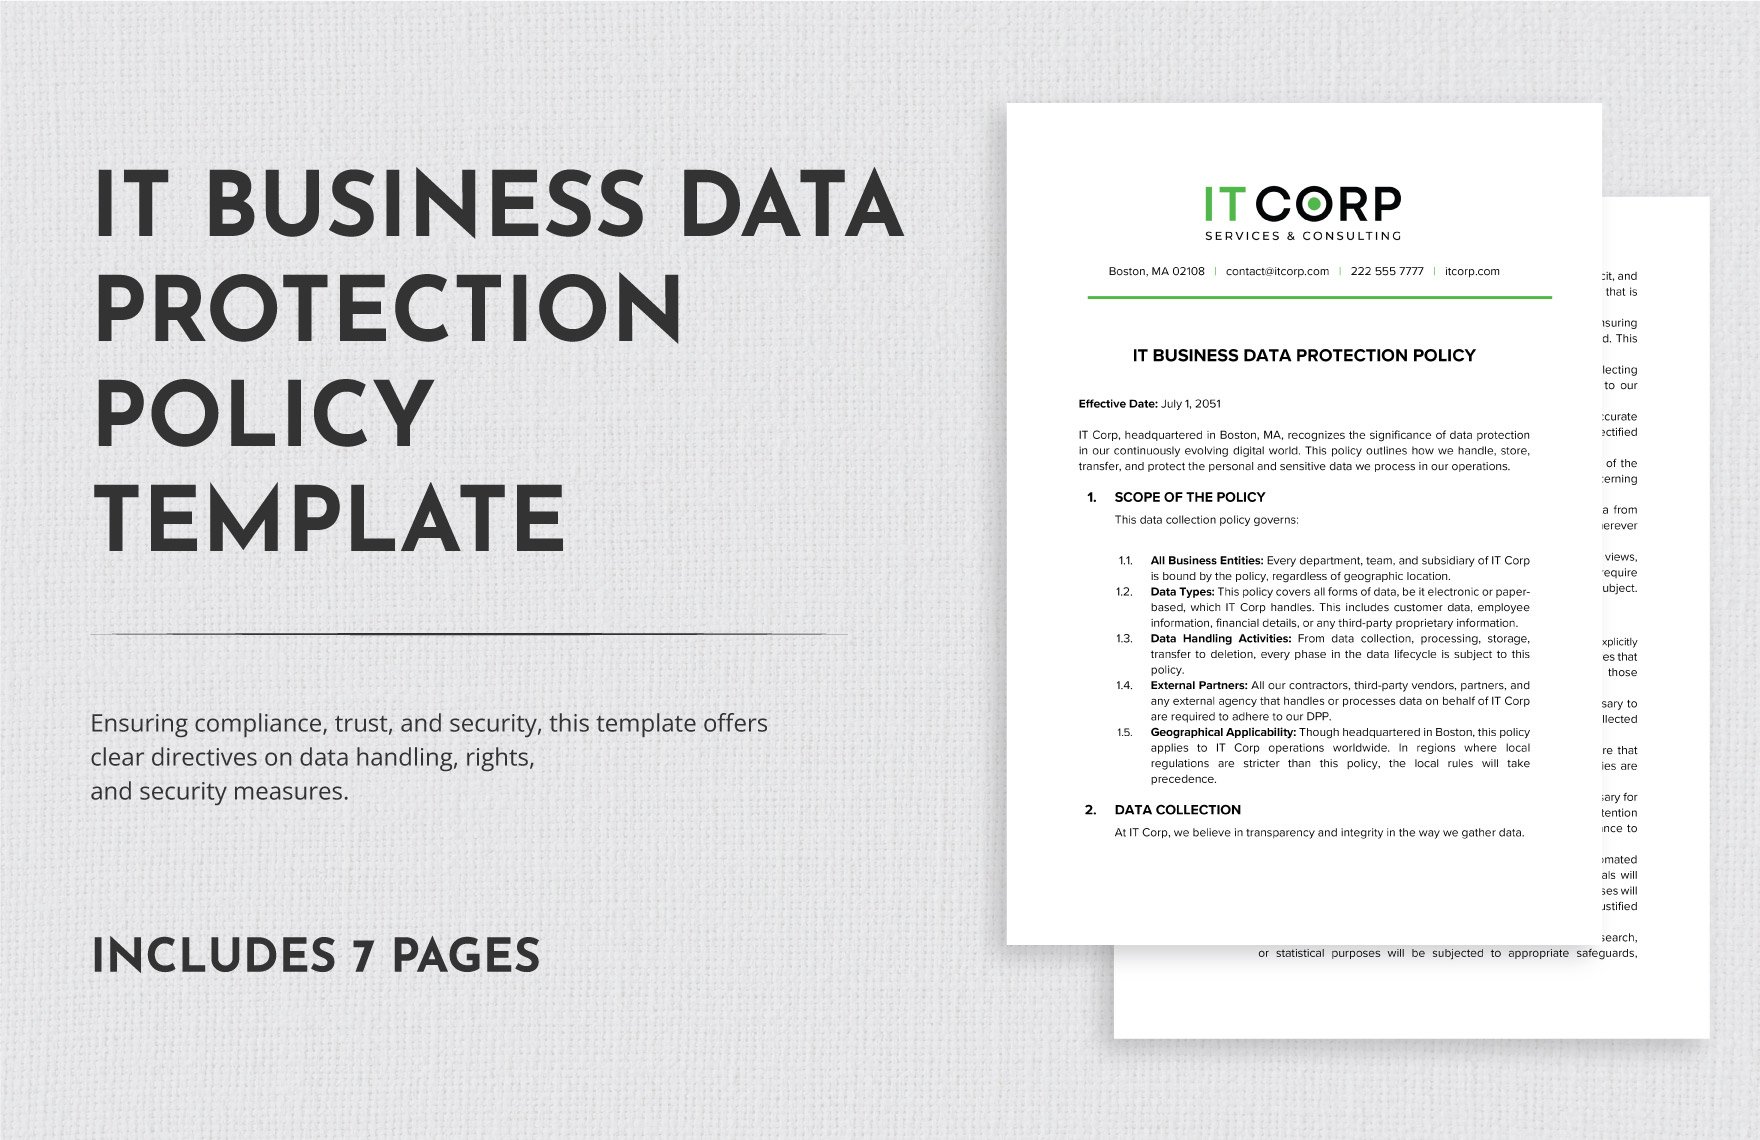 IT Business Data Protection Policy Template in Word, Google Docs, PDF